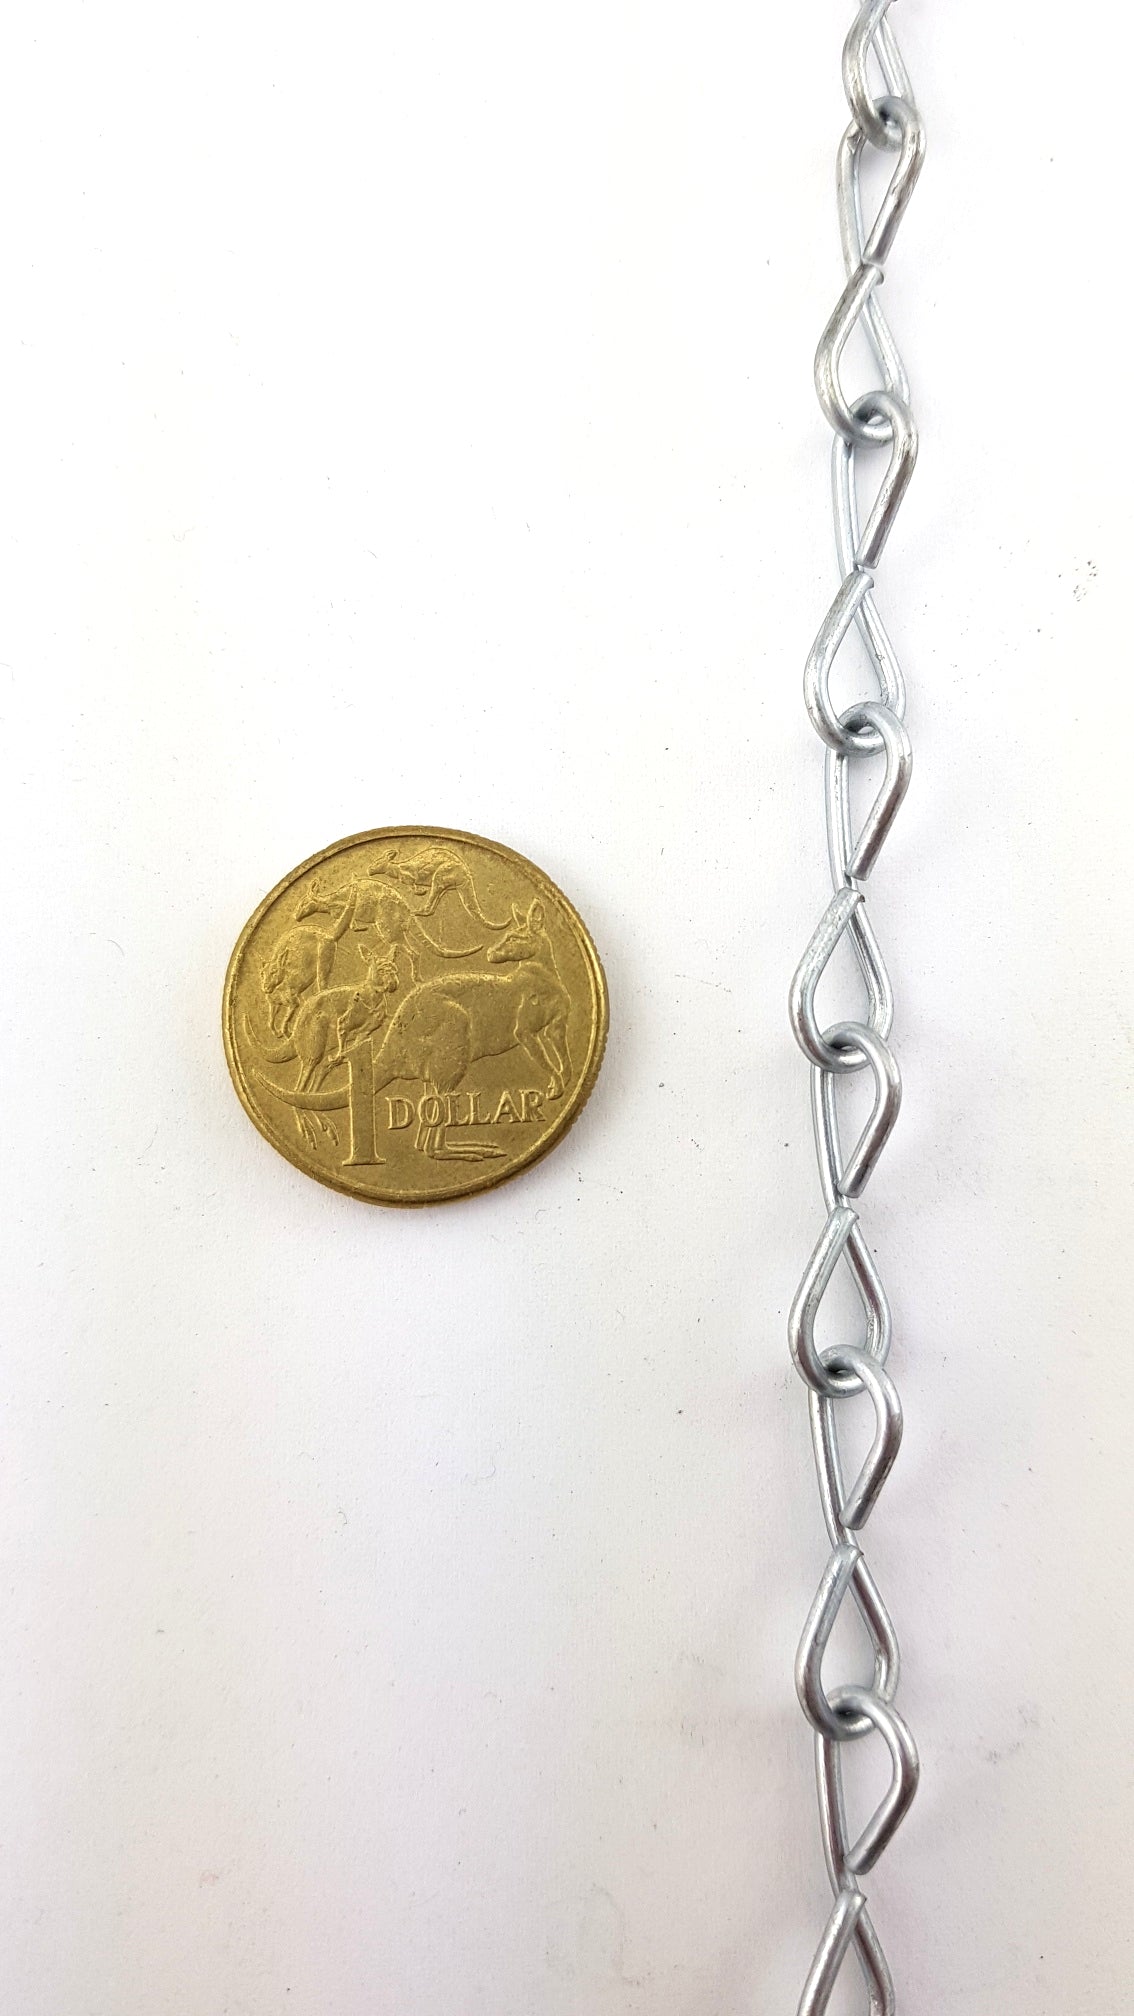 Australian made Single Jack Chain in galvanised finish, size 1.6mm and quantity of 250 metres. Melbourne, Australia.